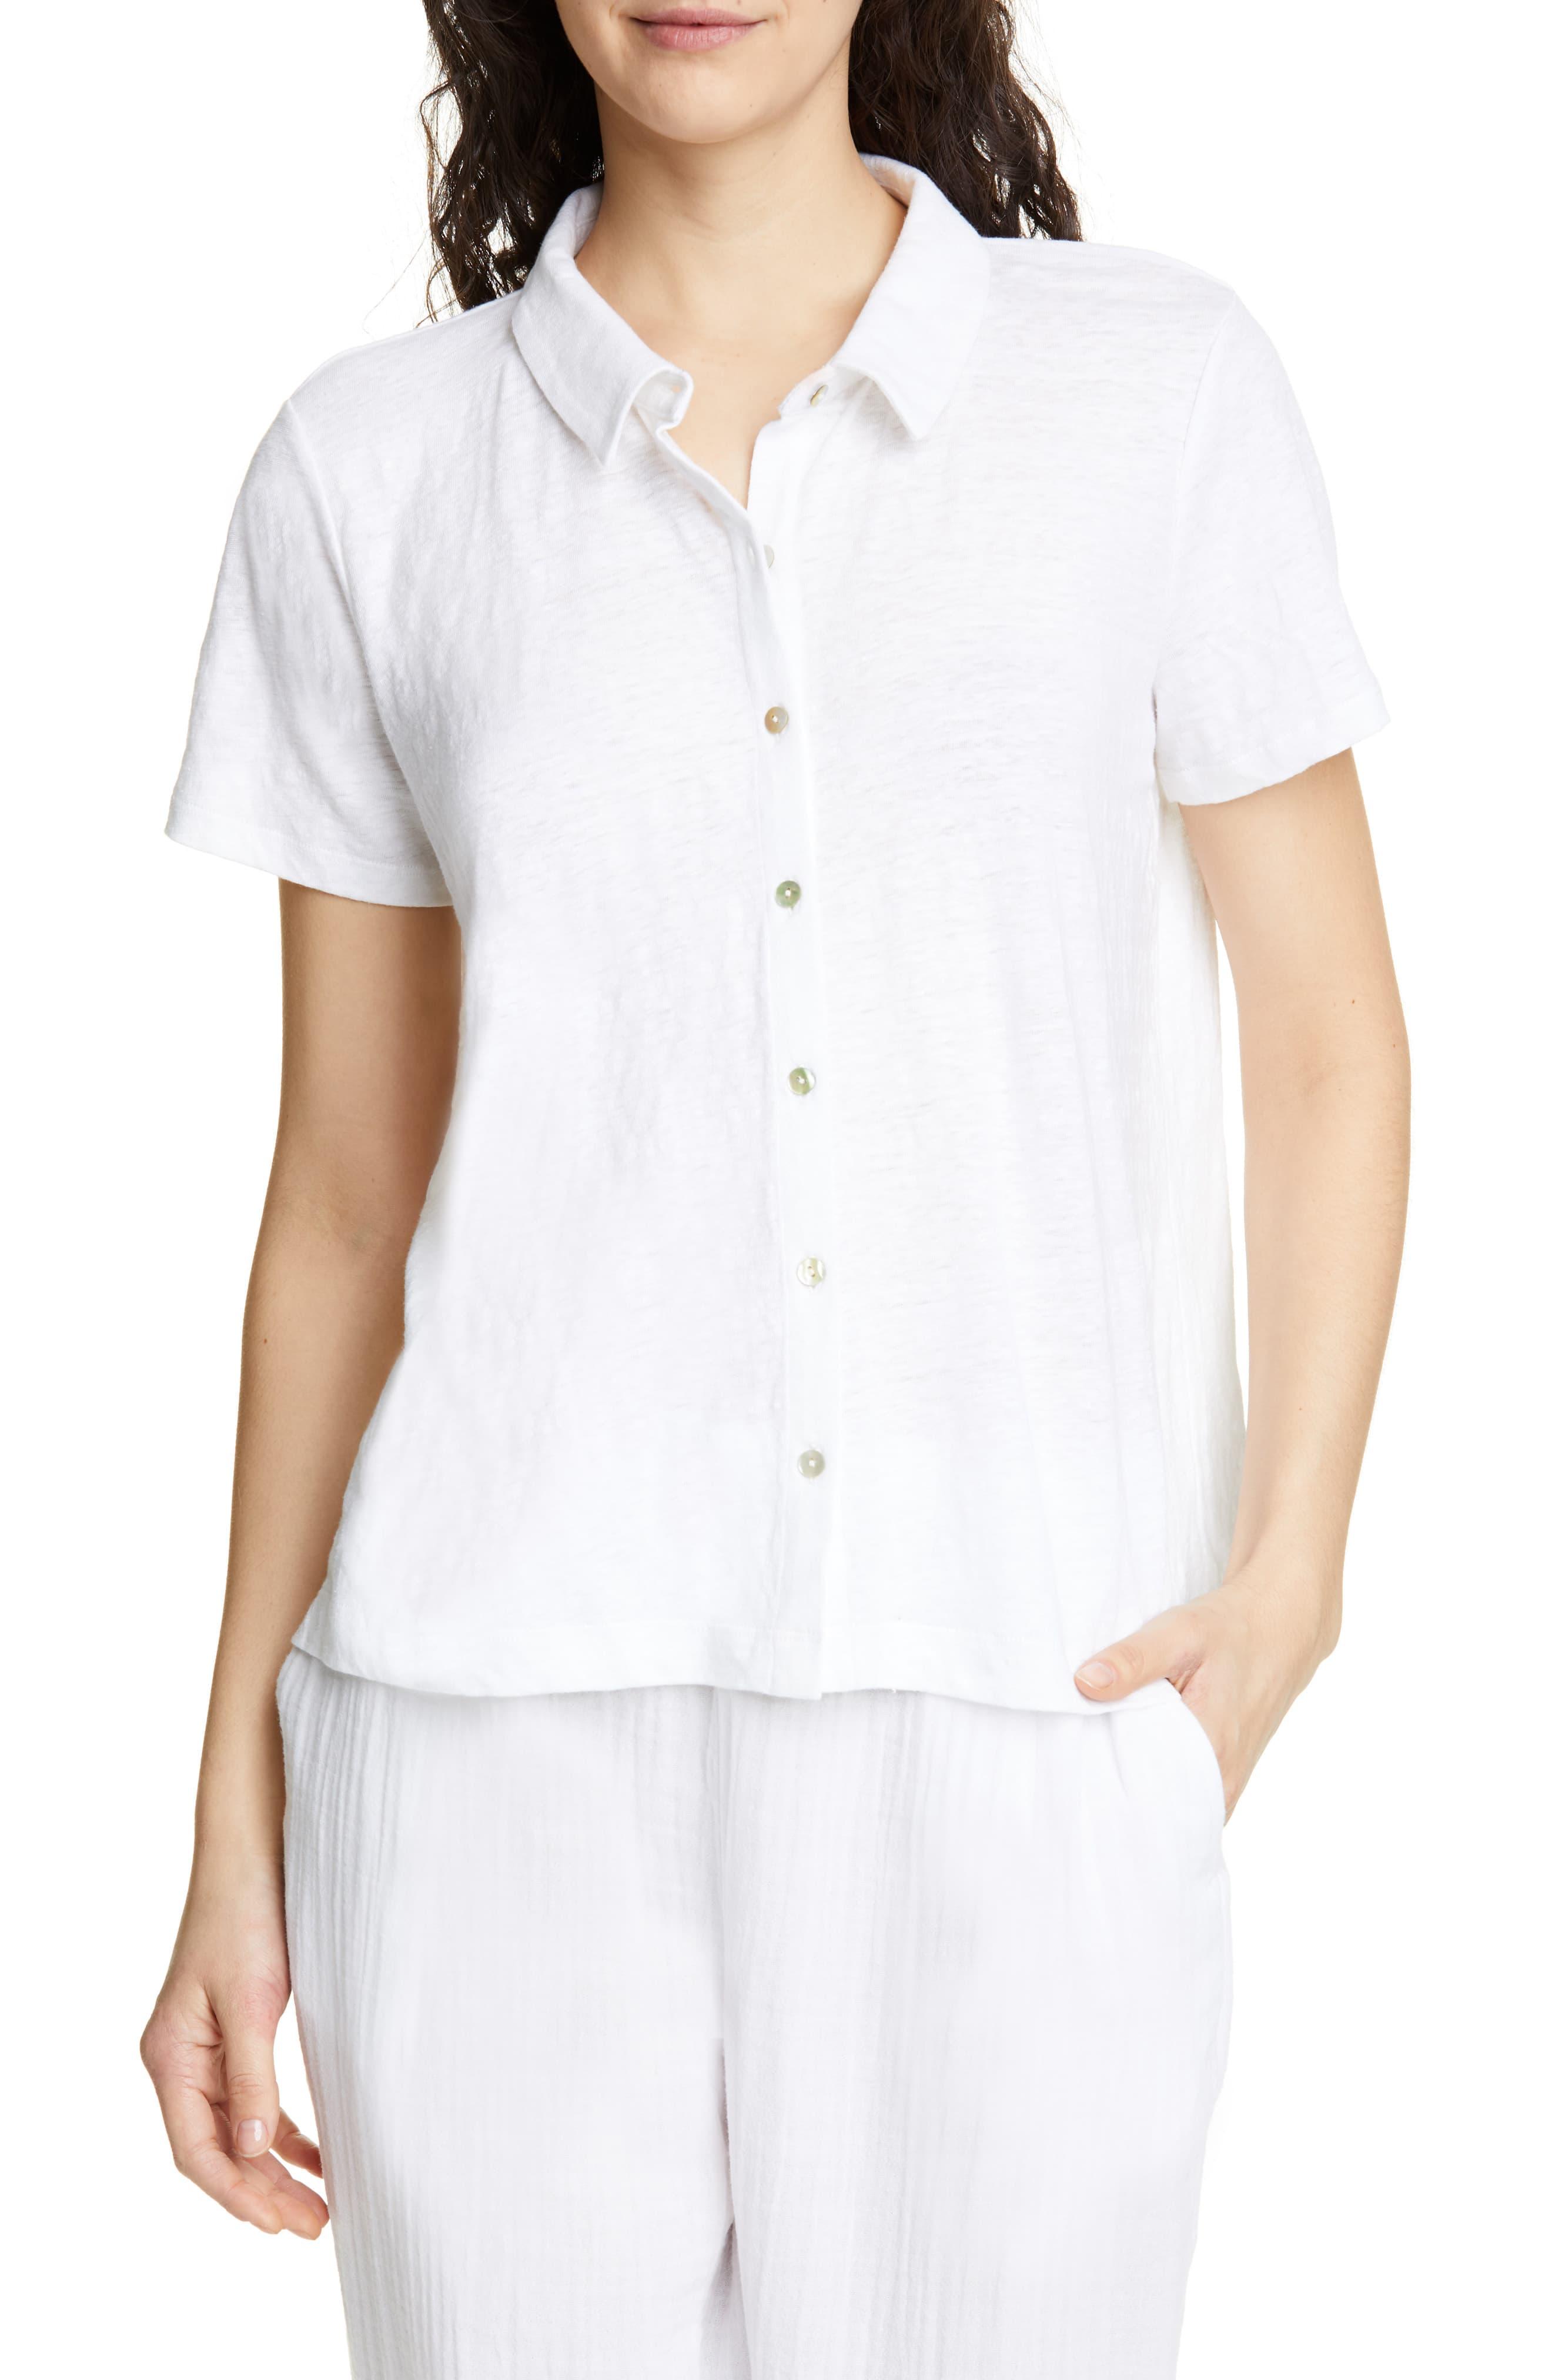 Eileen Fisher Short Sleeve Organic Linen Button Up Blouse in White - Lyst